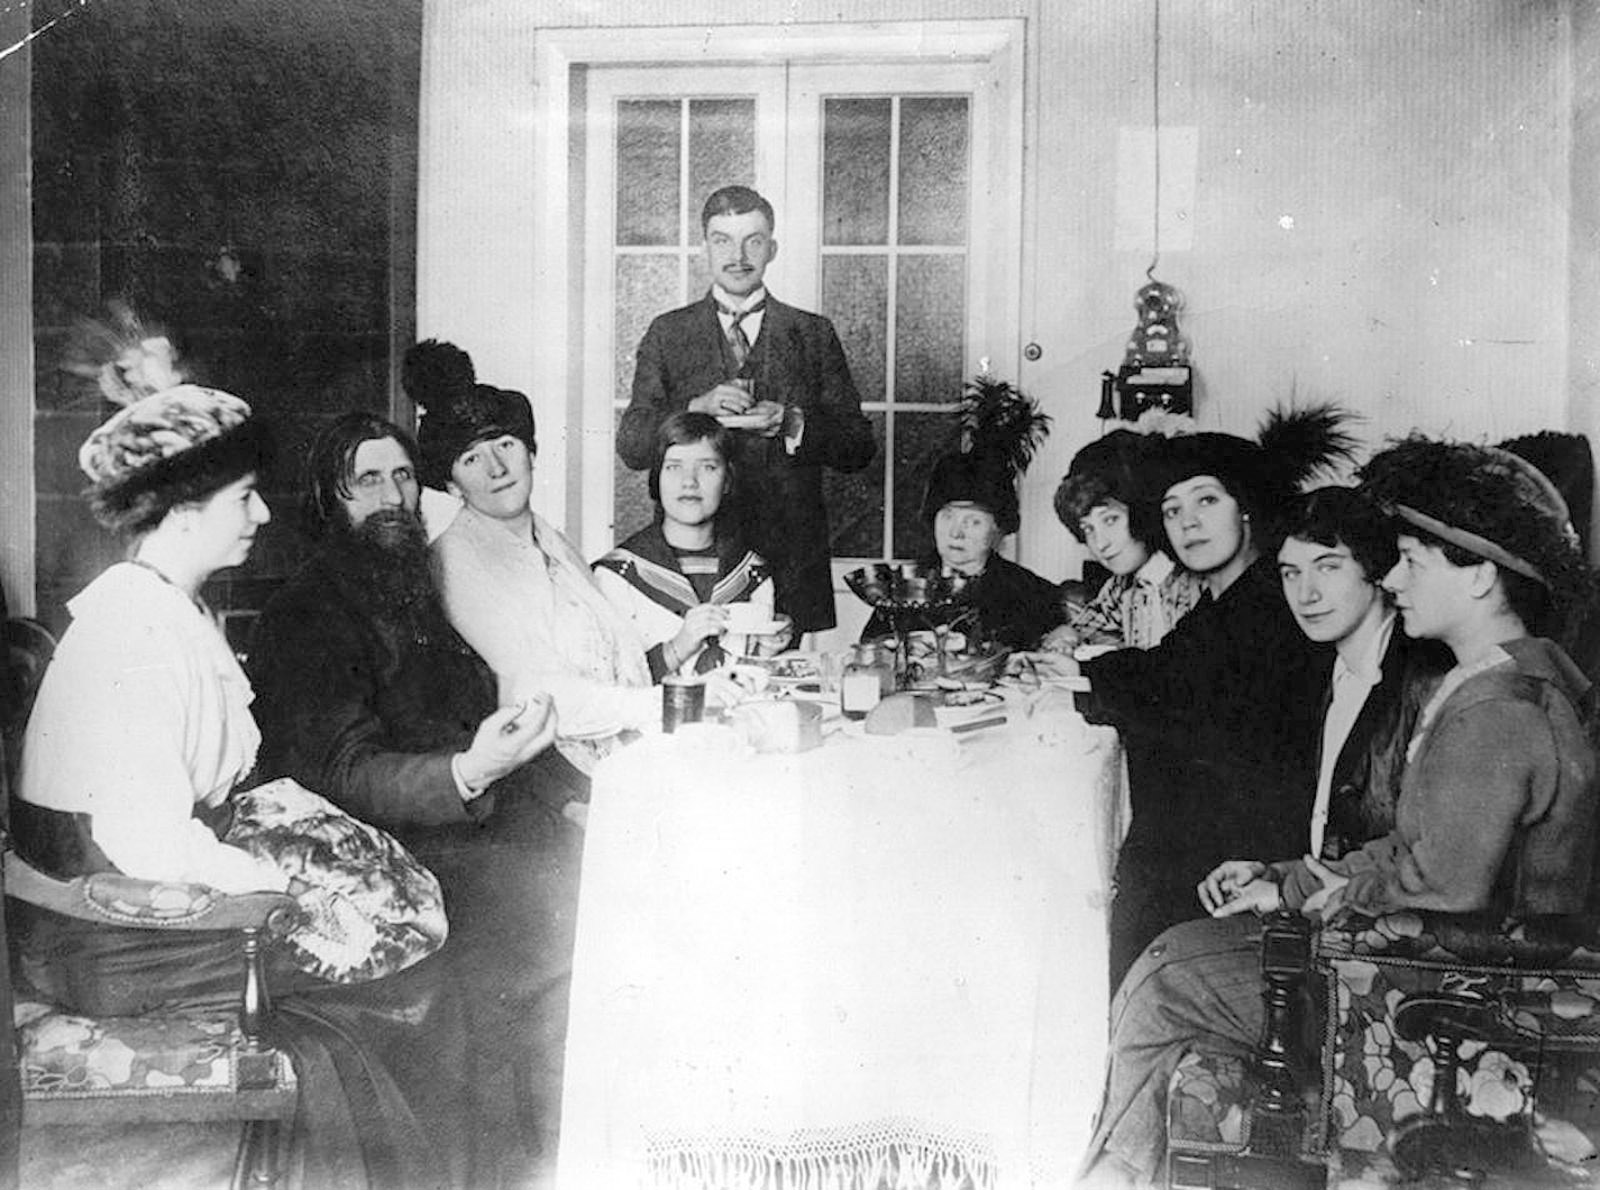 Rasputin with some of his admirers, St. Petersburg, circa March 1914. Among them xare Tsarina Alexandra’s close friend Lily Dehn (third from left), Rasputin’s daughter Maria (fourth from left), and Munya Golovina (far right), a devoted disciple who introduced Rasputin to Felix Yusupov, one of his killers.